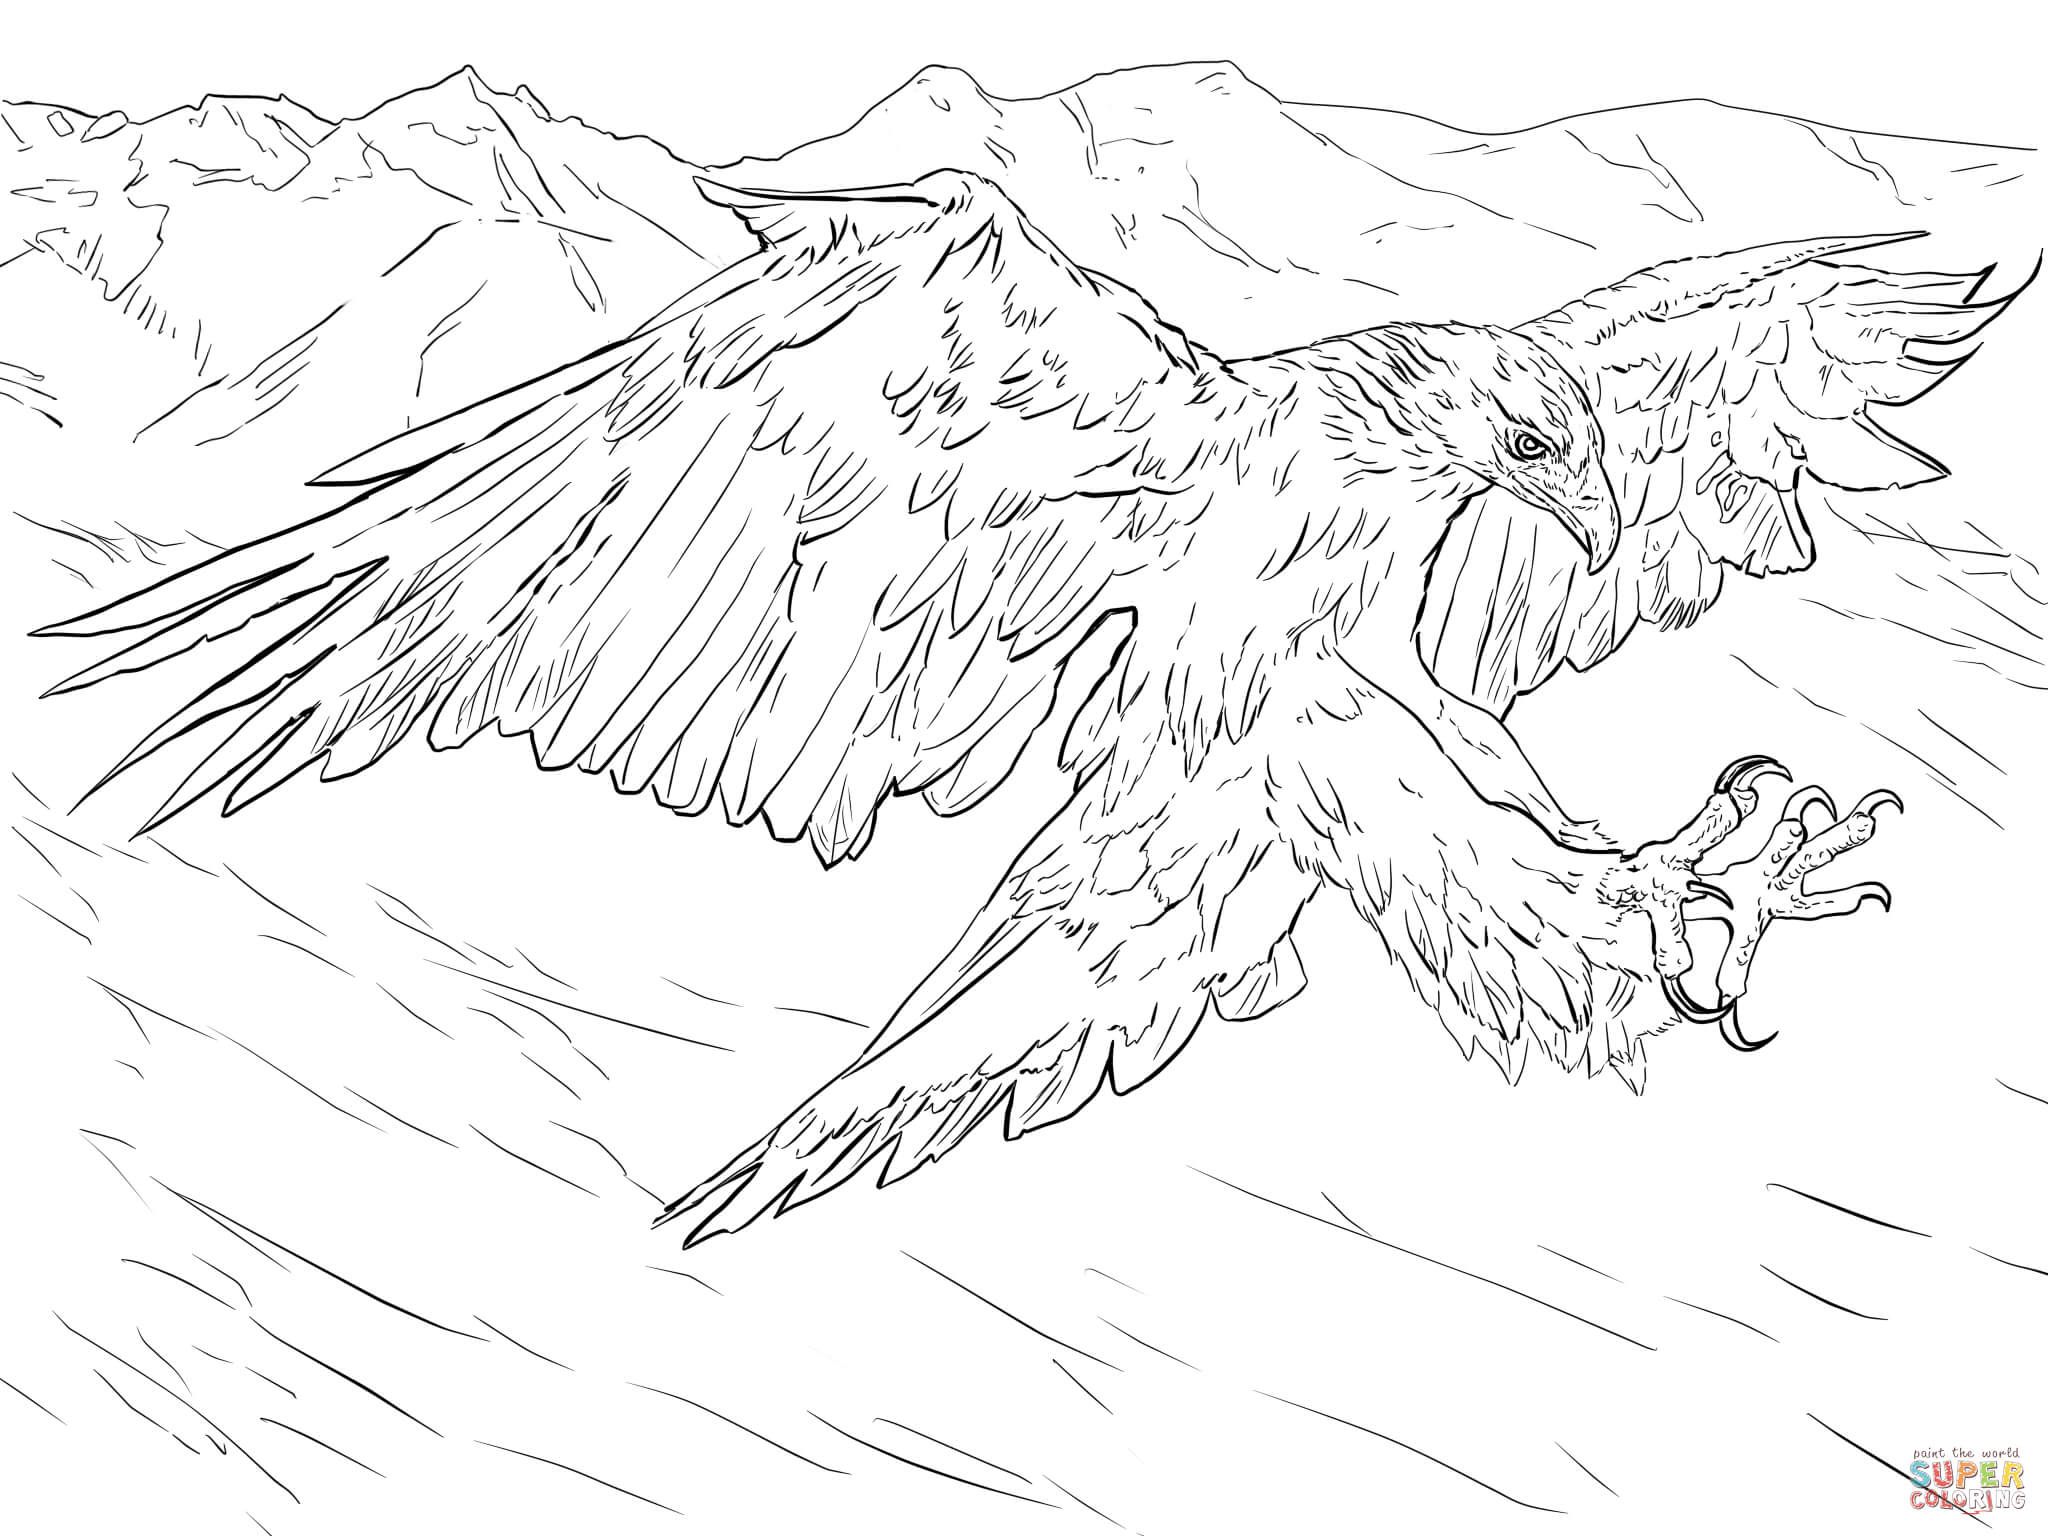 Golden eagle attacks coloring page free printable coloring pages printable coloring pages free printable coloring pages free printable coloring